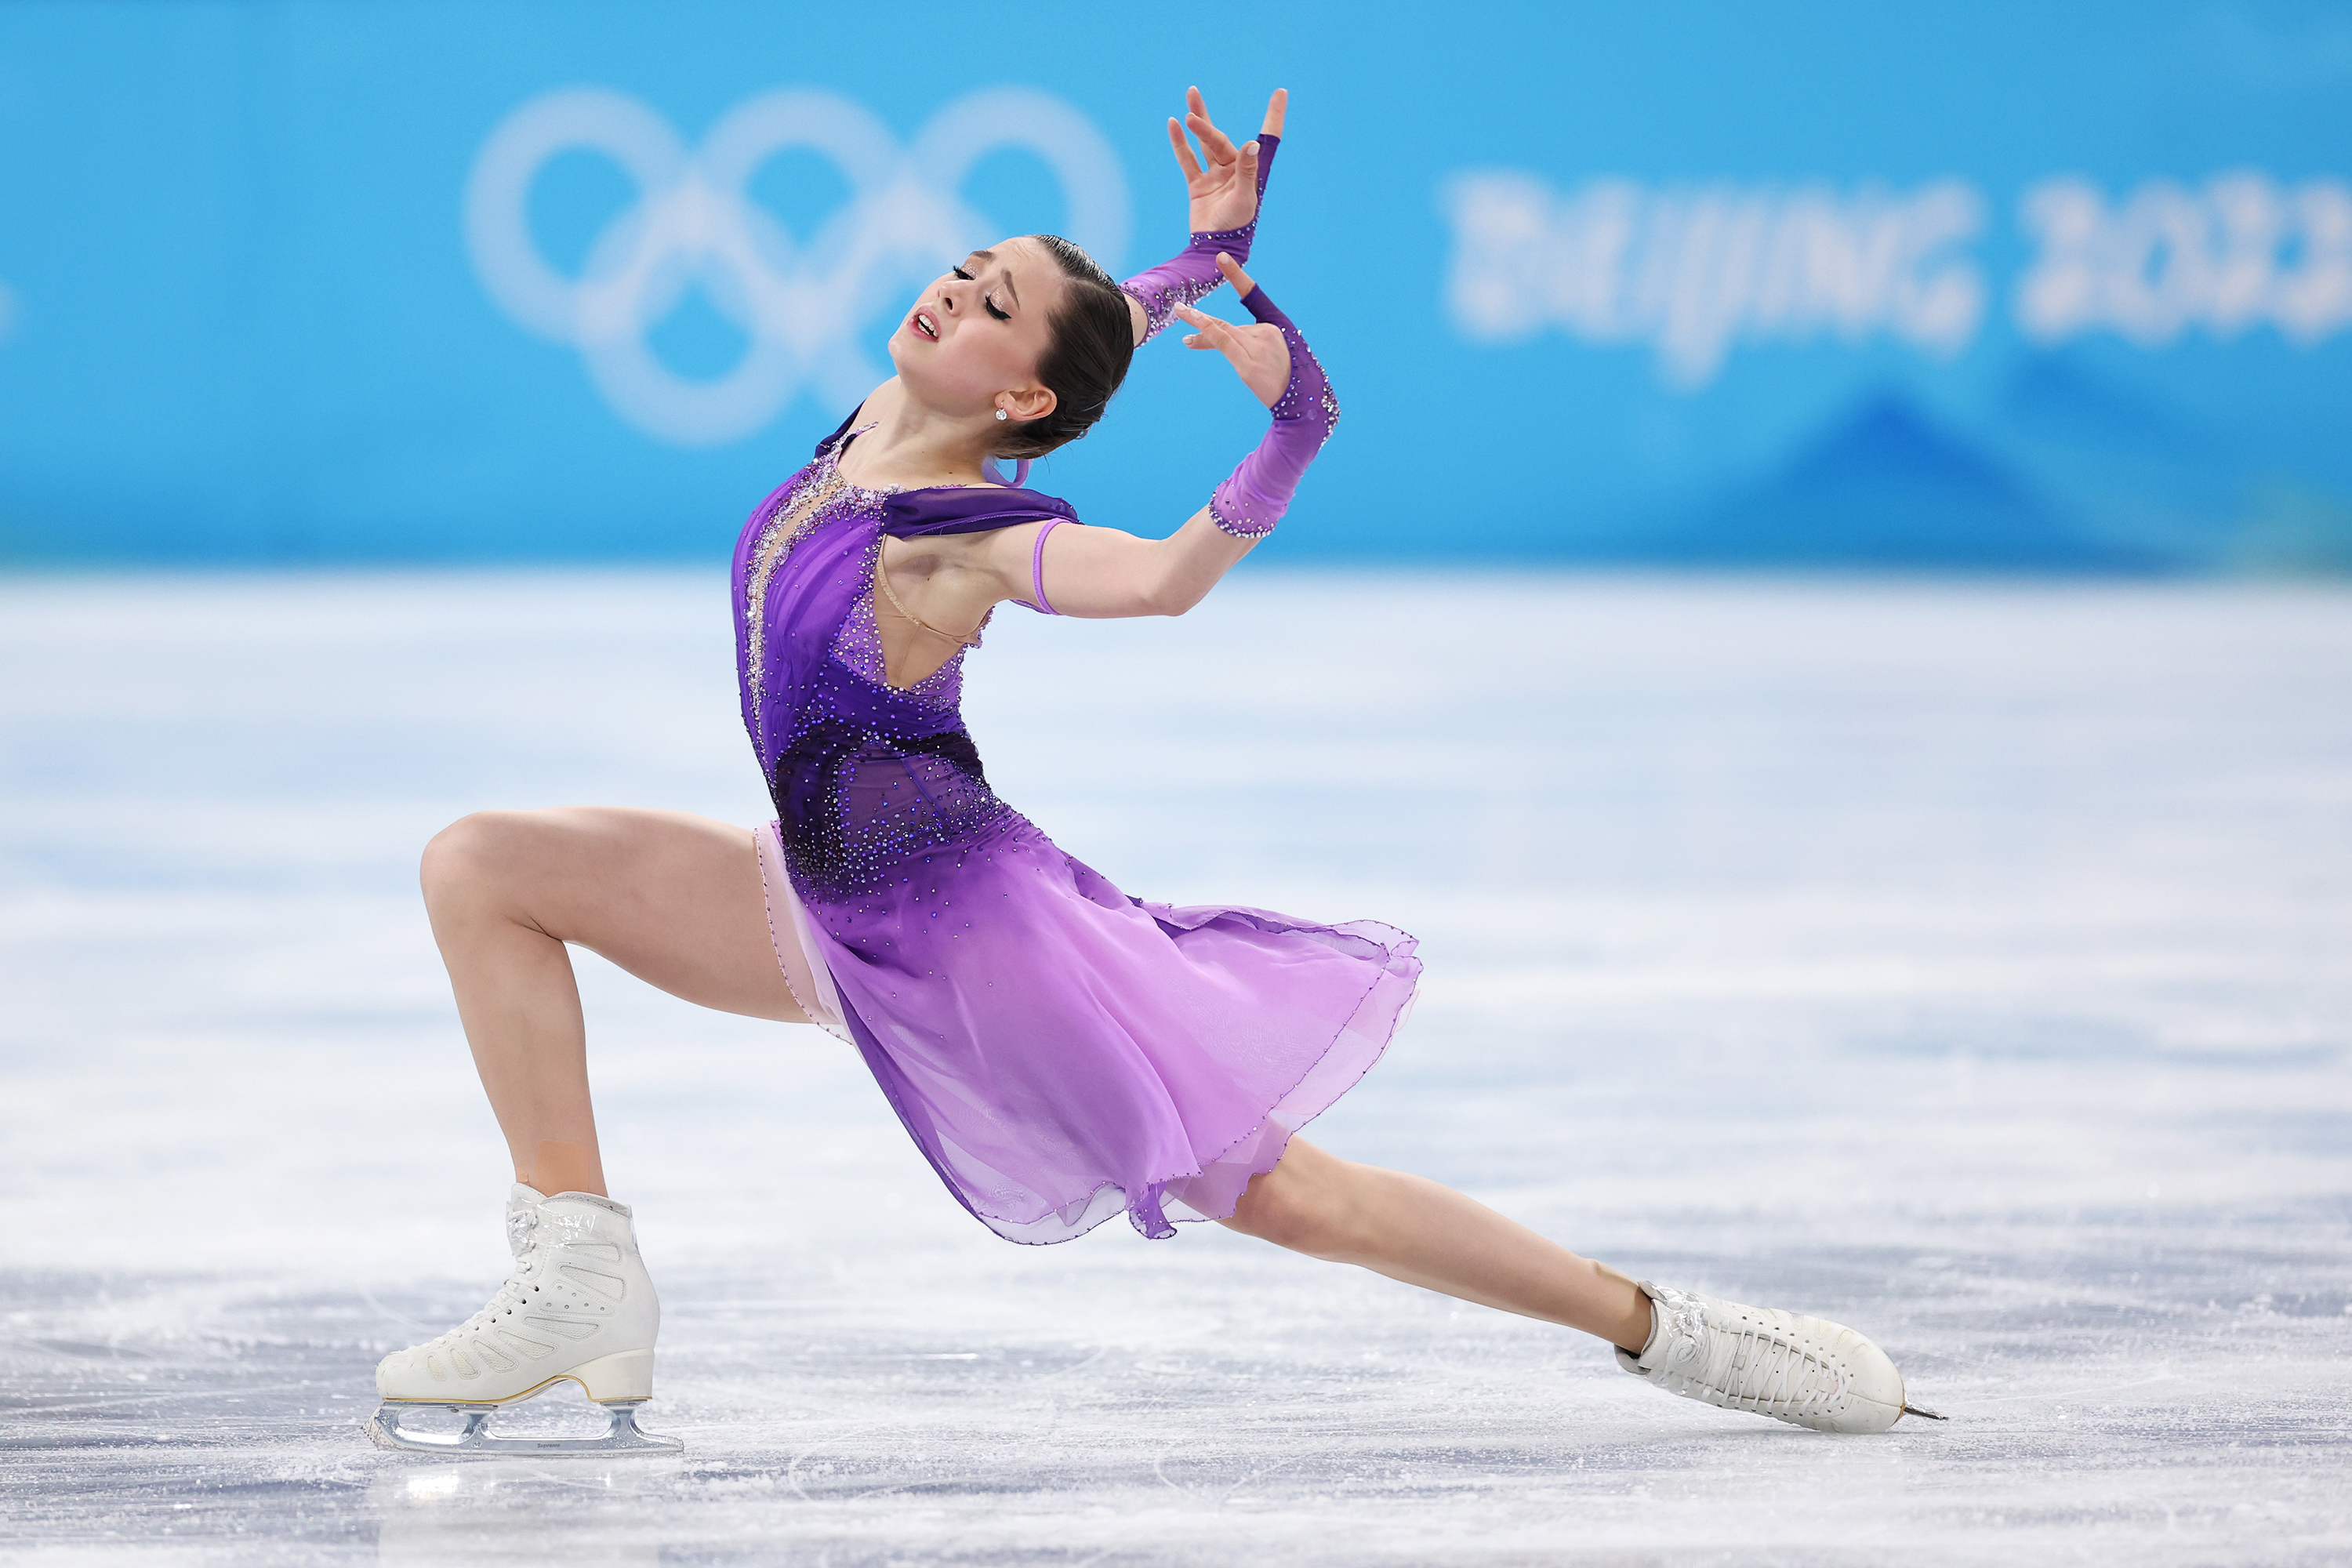 Team ROC’s Kamila Valieva performs during the short program of the women's figure skating competition on Tuesday.